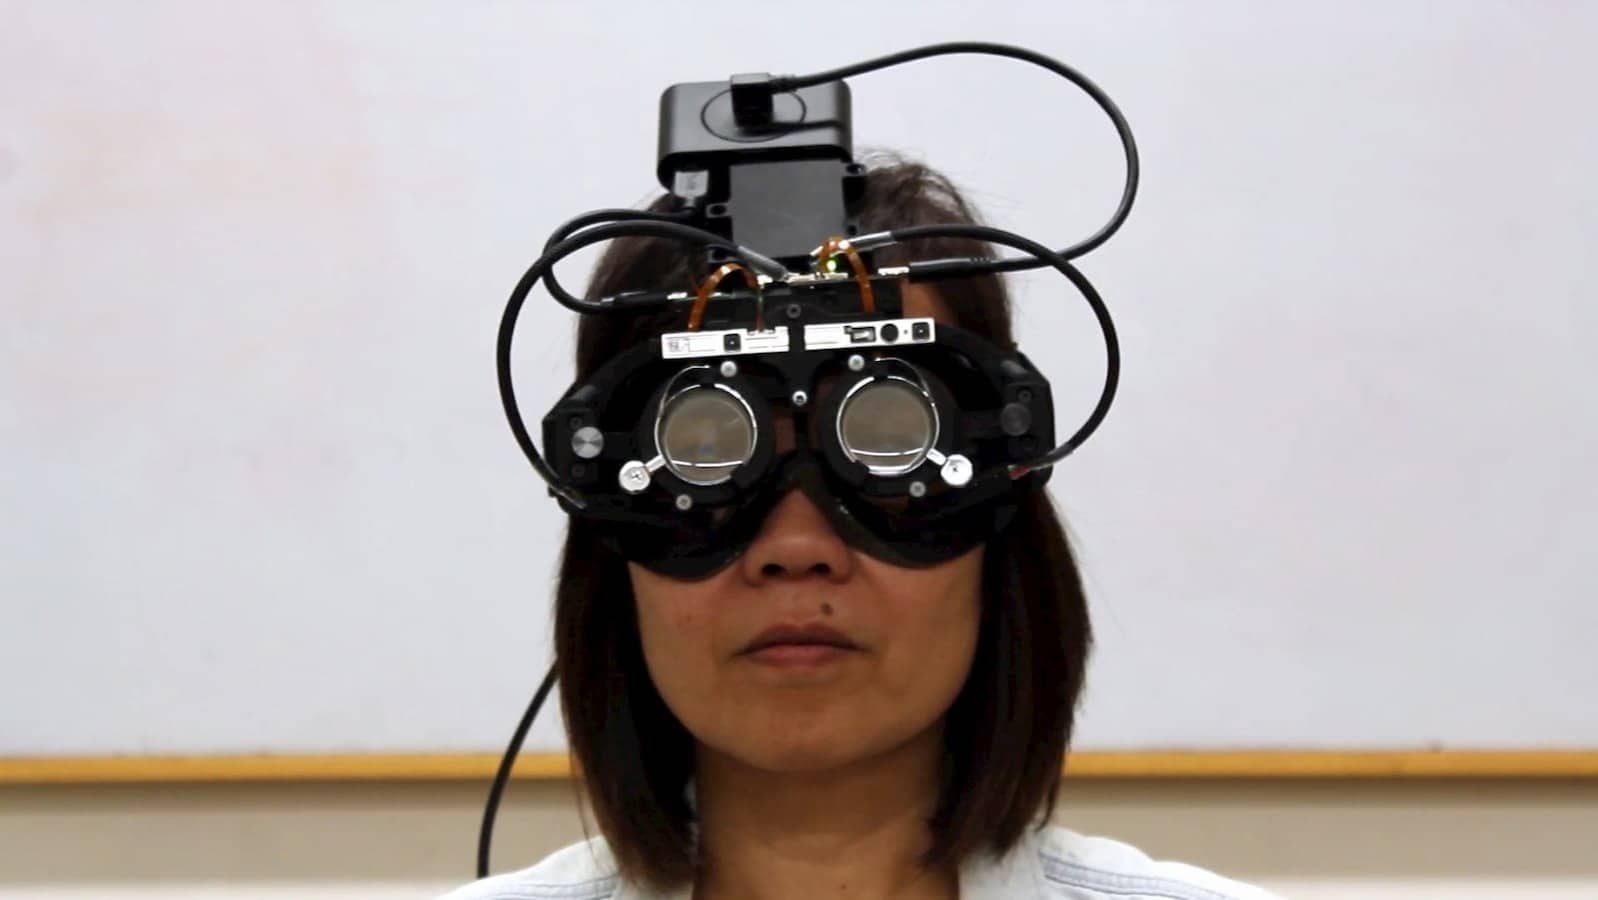 Stanford’s Autofocals Are Designed For Patients Suffering From Presbyopia